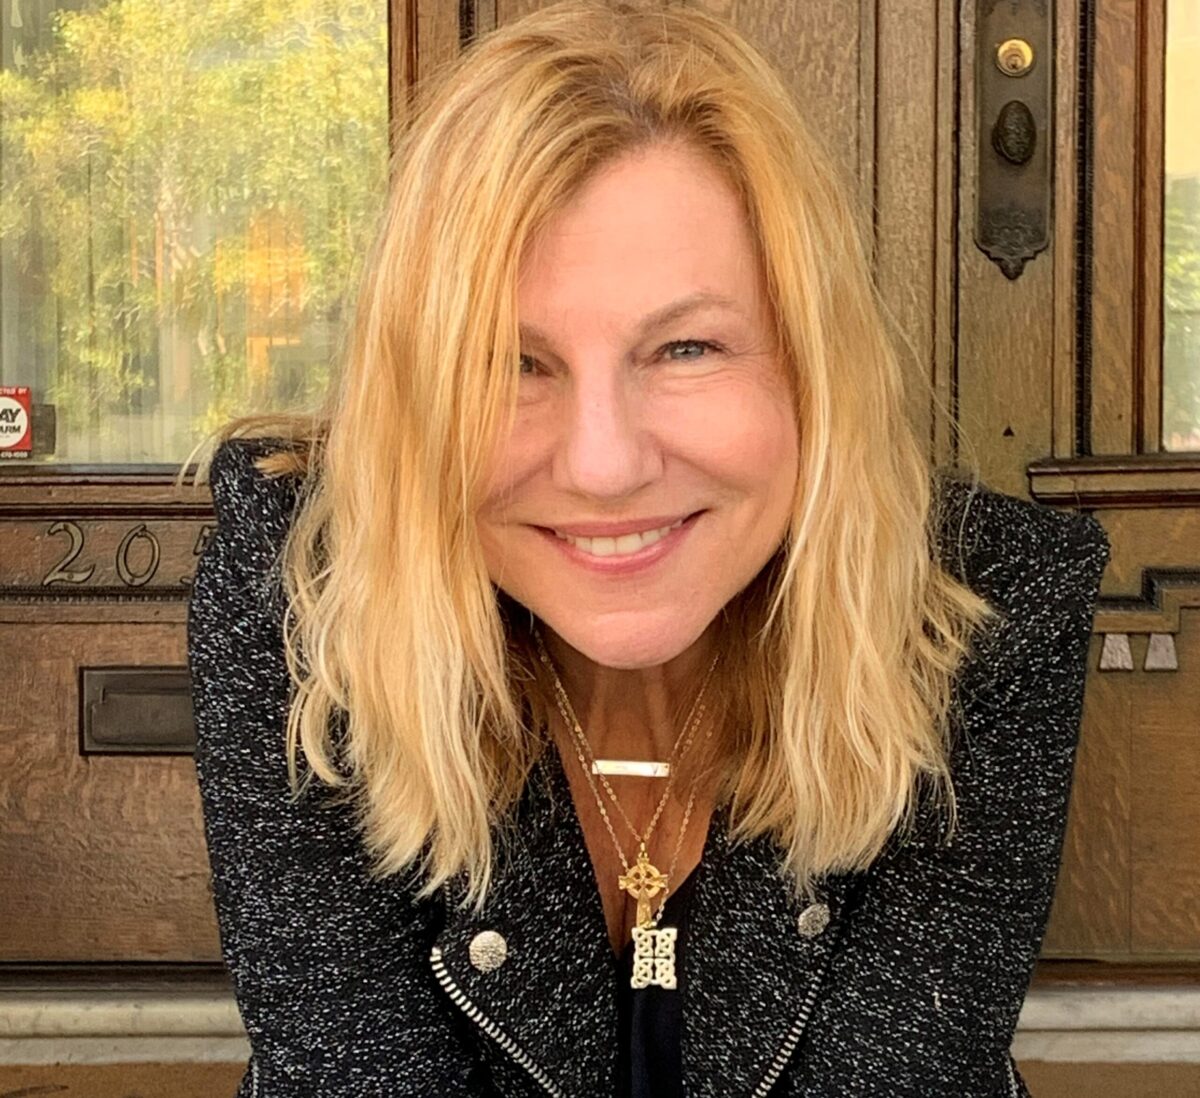 Photo of poet Valarie Hastings in jacket staring and smiling at the camera. Blonde haired, she has three pieces of jewelry dangling from her neck. 